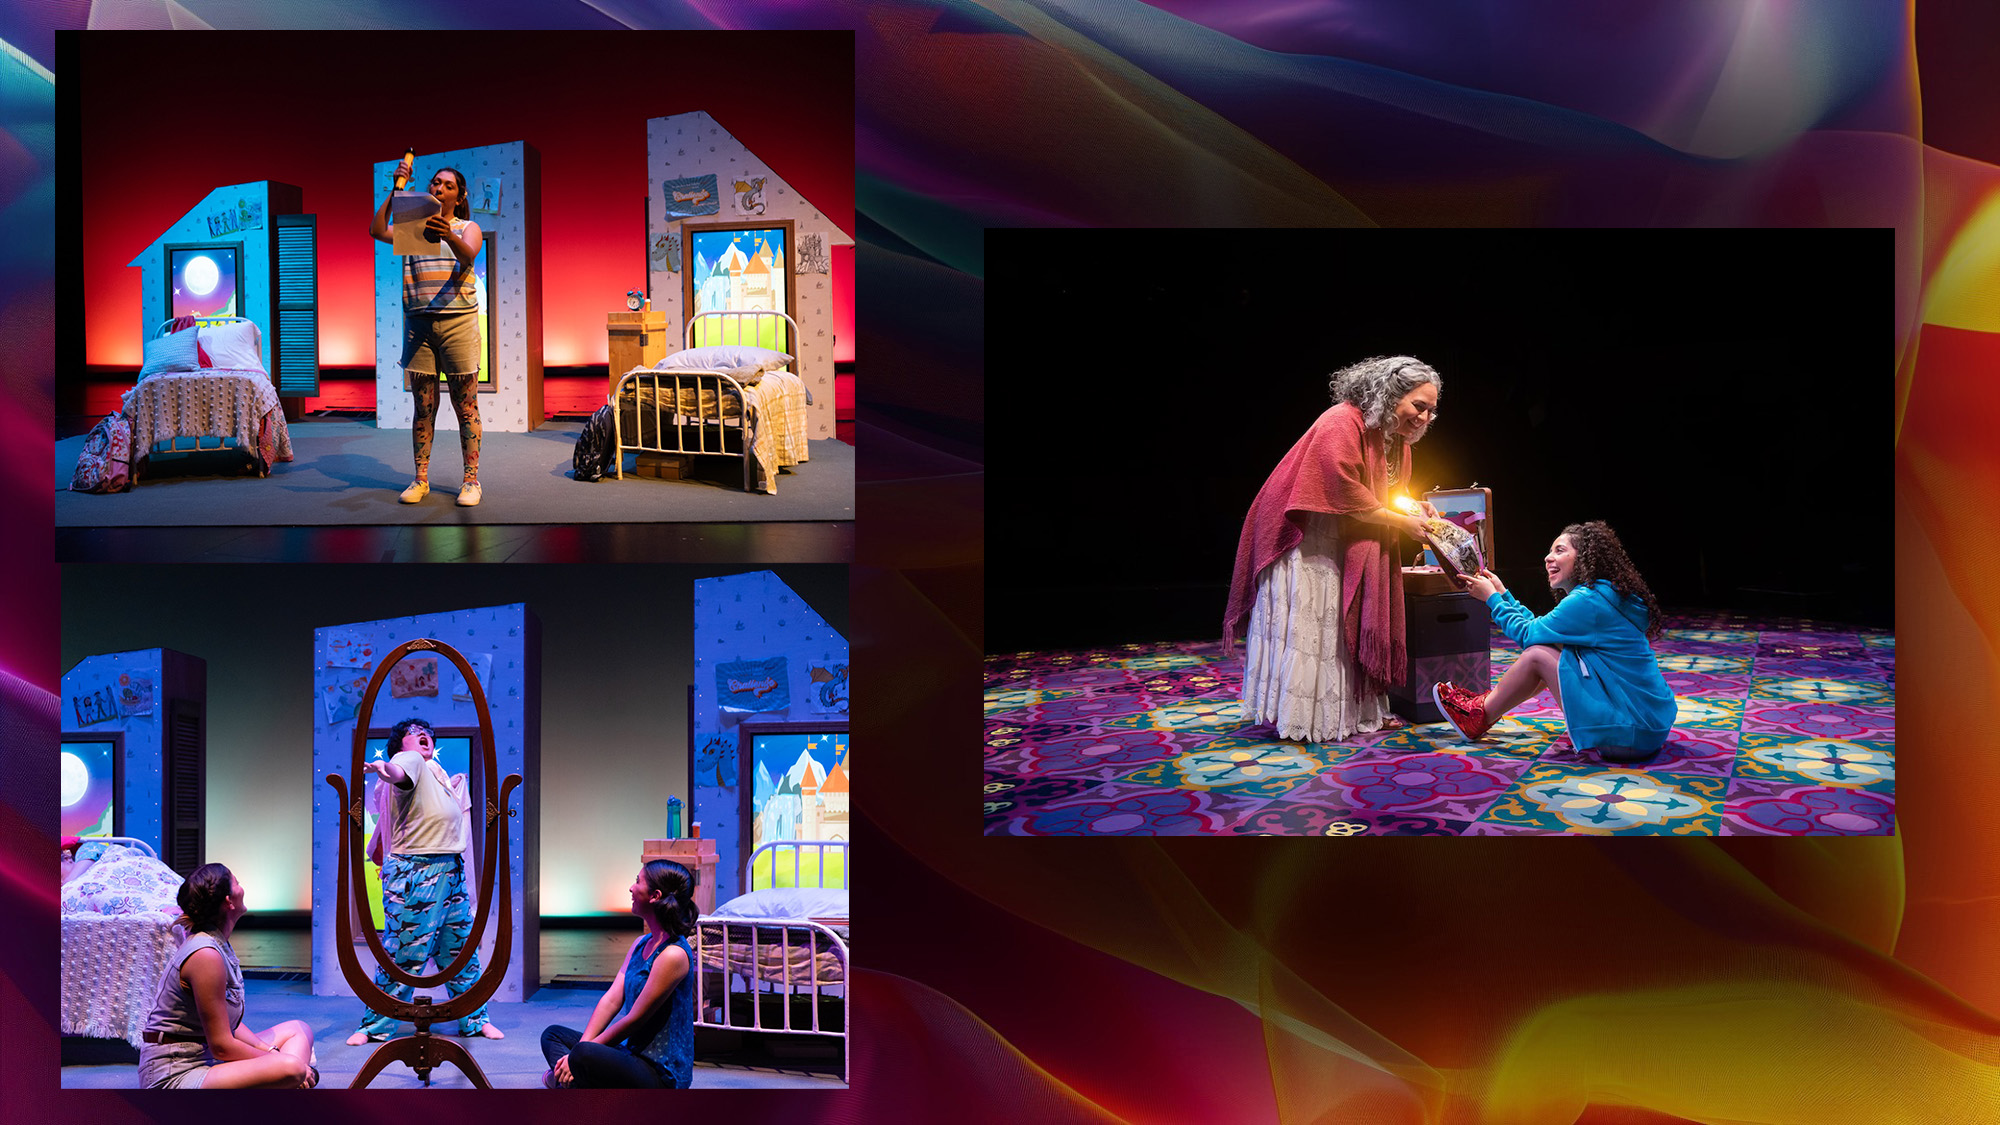 A multicolored field with three images. 
The first two images are of the same set. It is the shape of a house that a child might draw that has been split into three modular peices. The first of the two is of a girl in front of the that is lit with fun cyan and red light. 
The second image the frame of a mirror stands at center as a child wearing a cape pretends to look at their own reflection as a superhero.
The last image is of an old woman and a little girl on a set that is very simple expect for the most extraordinary floor. The floor is patterned like Talavera tiles in purples, magentas, yellows, cyans and whites. It seems luminous and glows in the light.